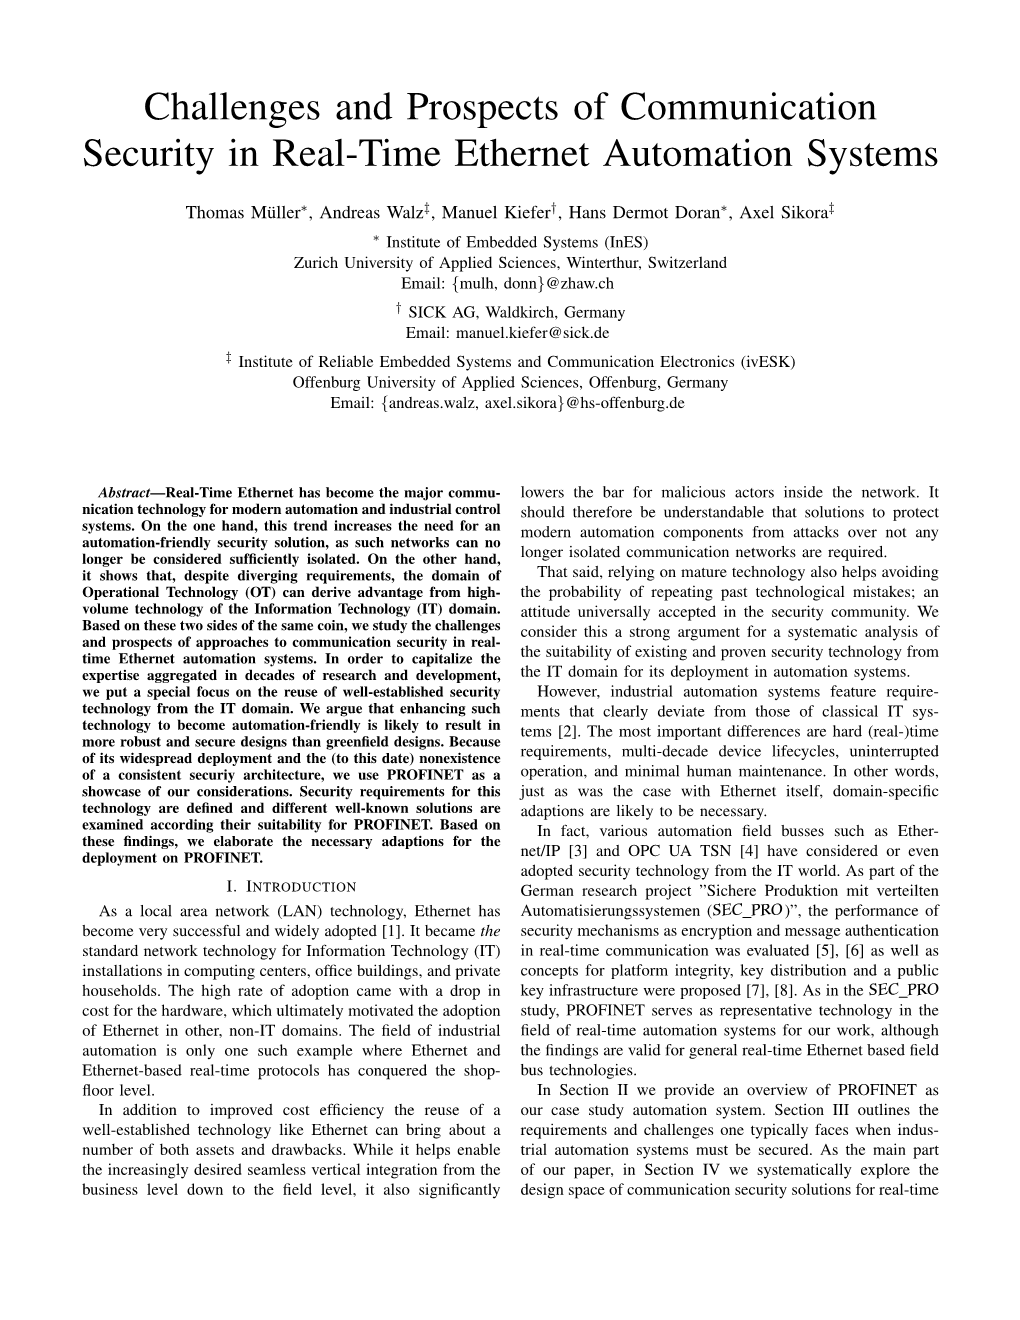 Challenges and Prospects of Communication Security in Real-Time Ethernet Automation Systems